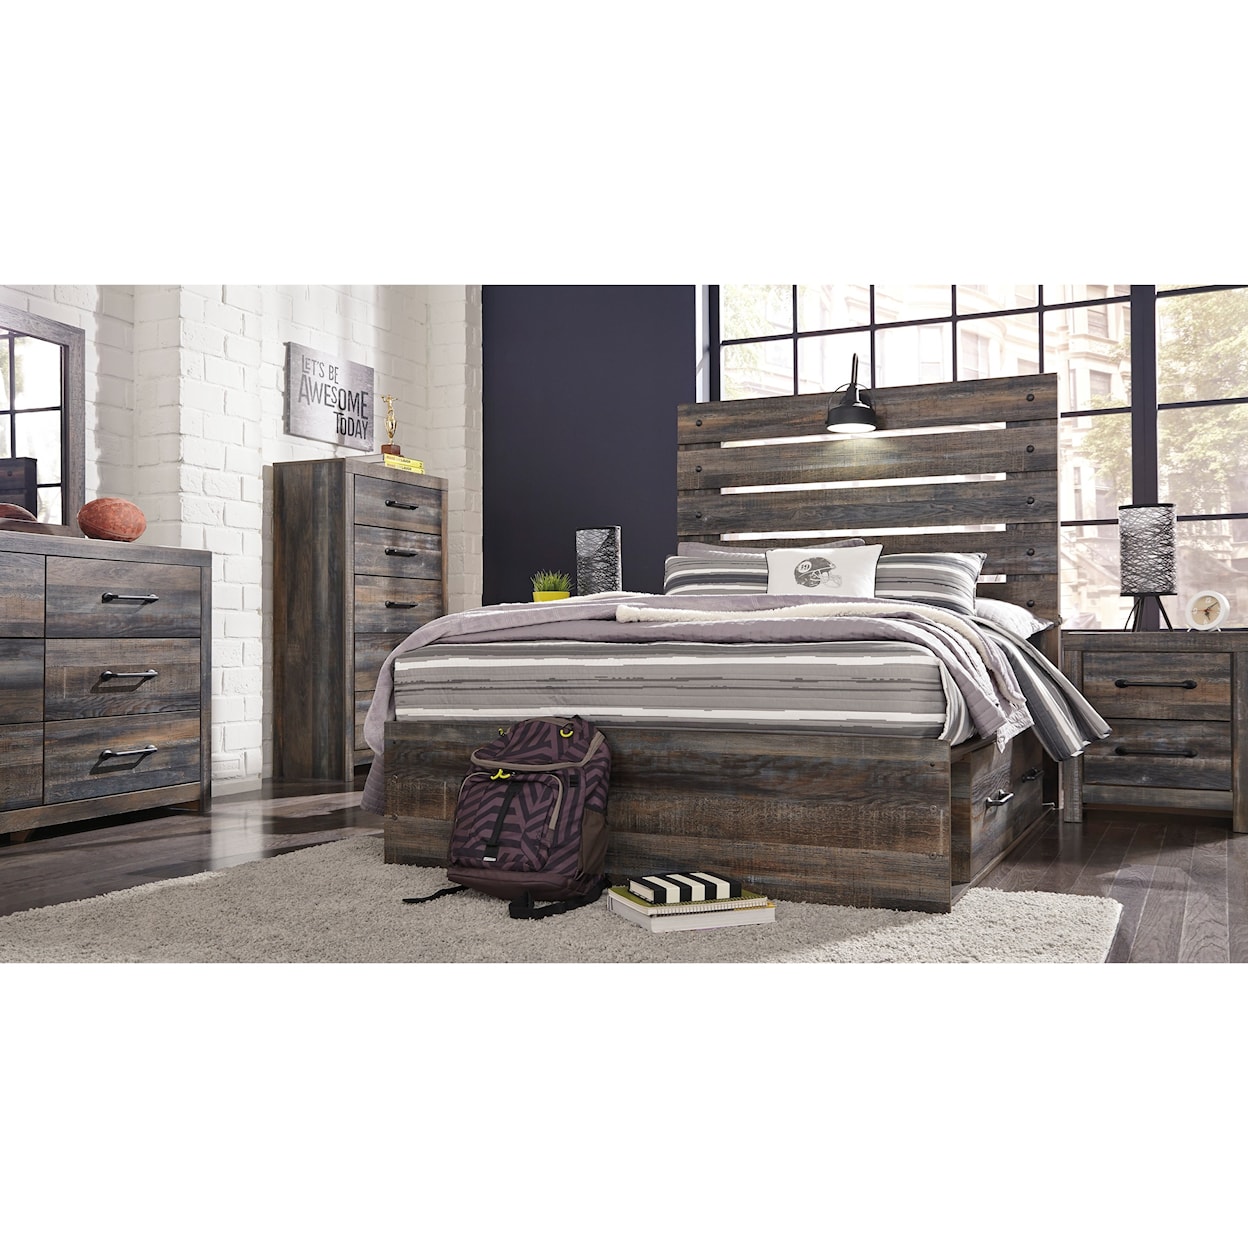 Michael Alan Select Drystan Full Storage Bed with 4 Drawers